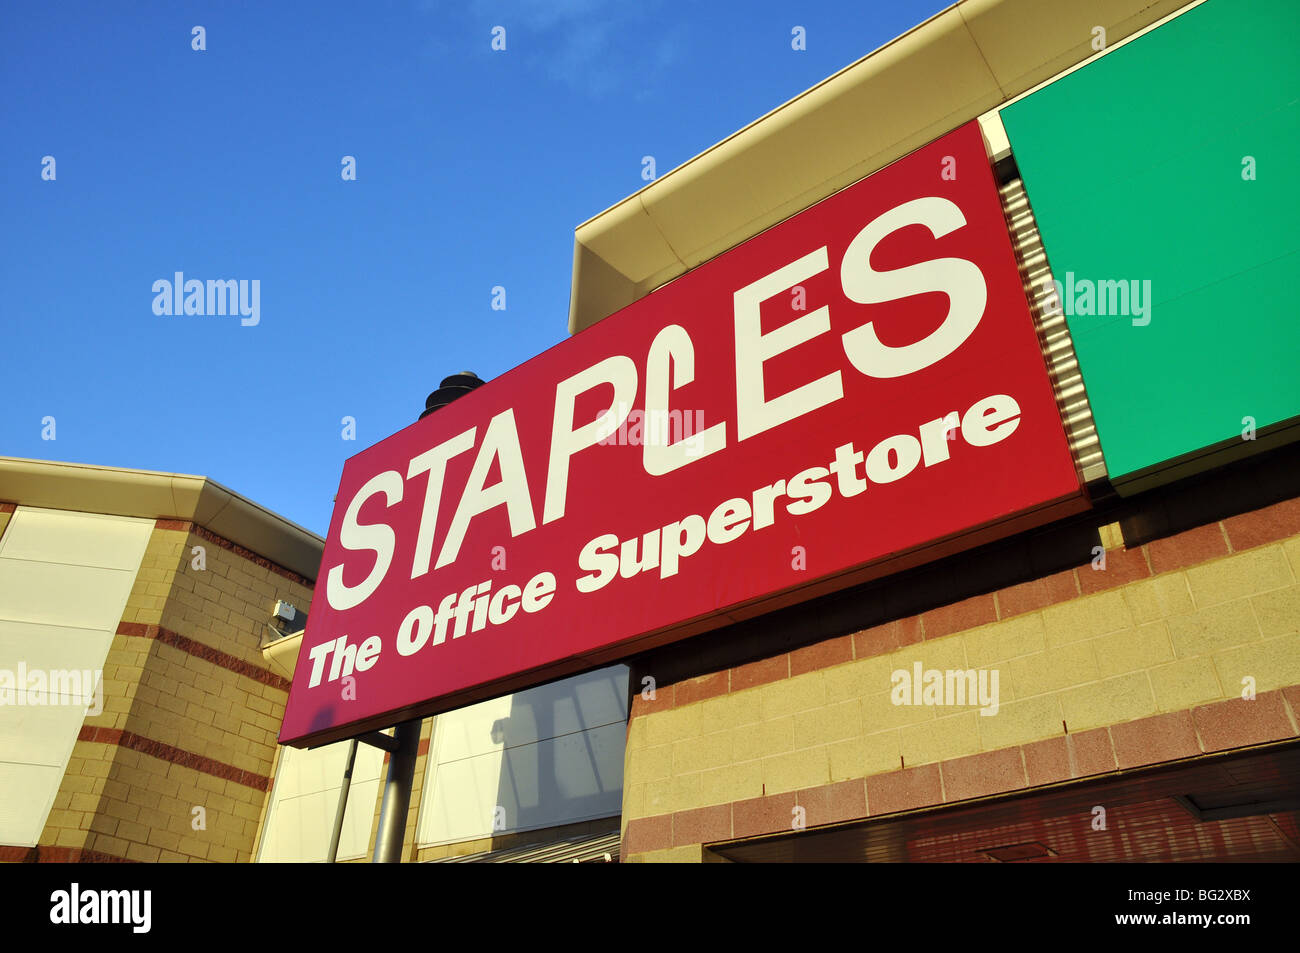 Staples the office superstore Stock Photo